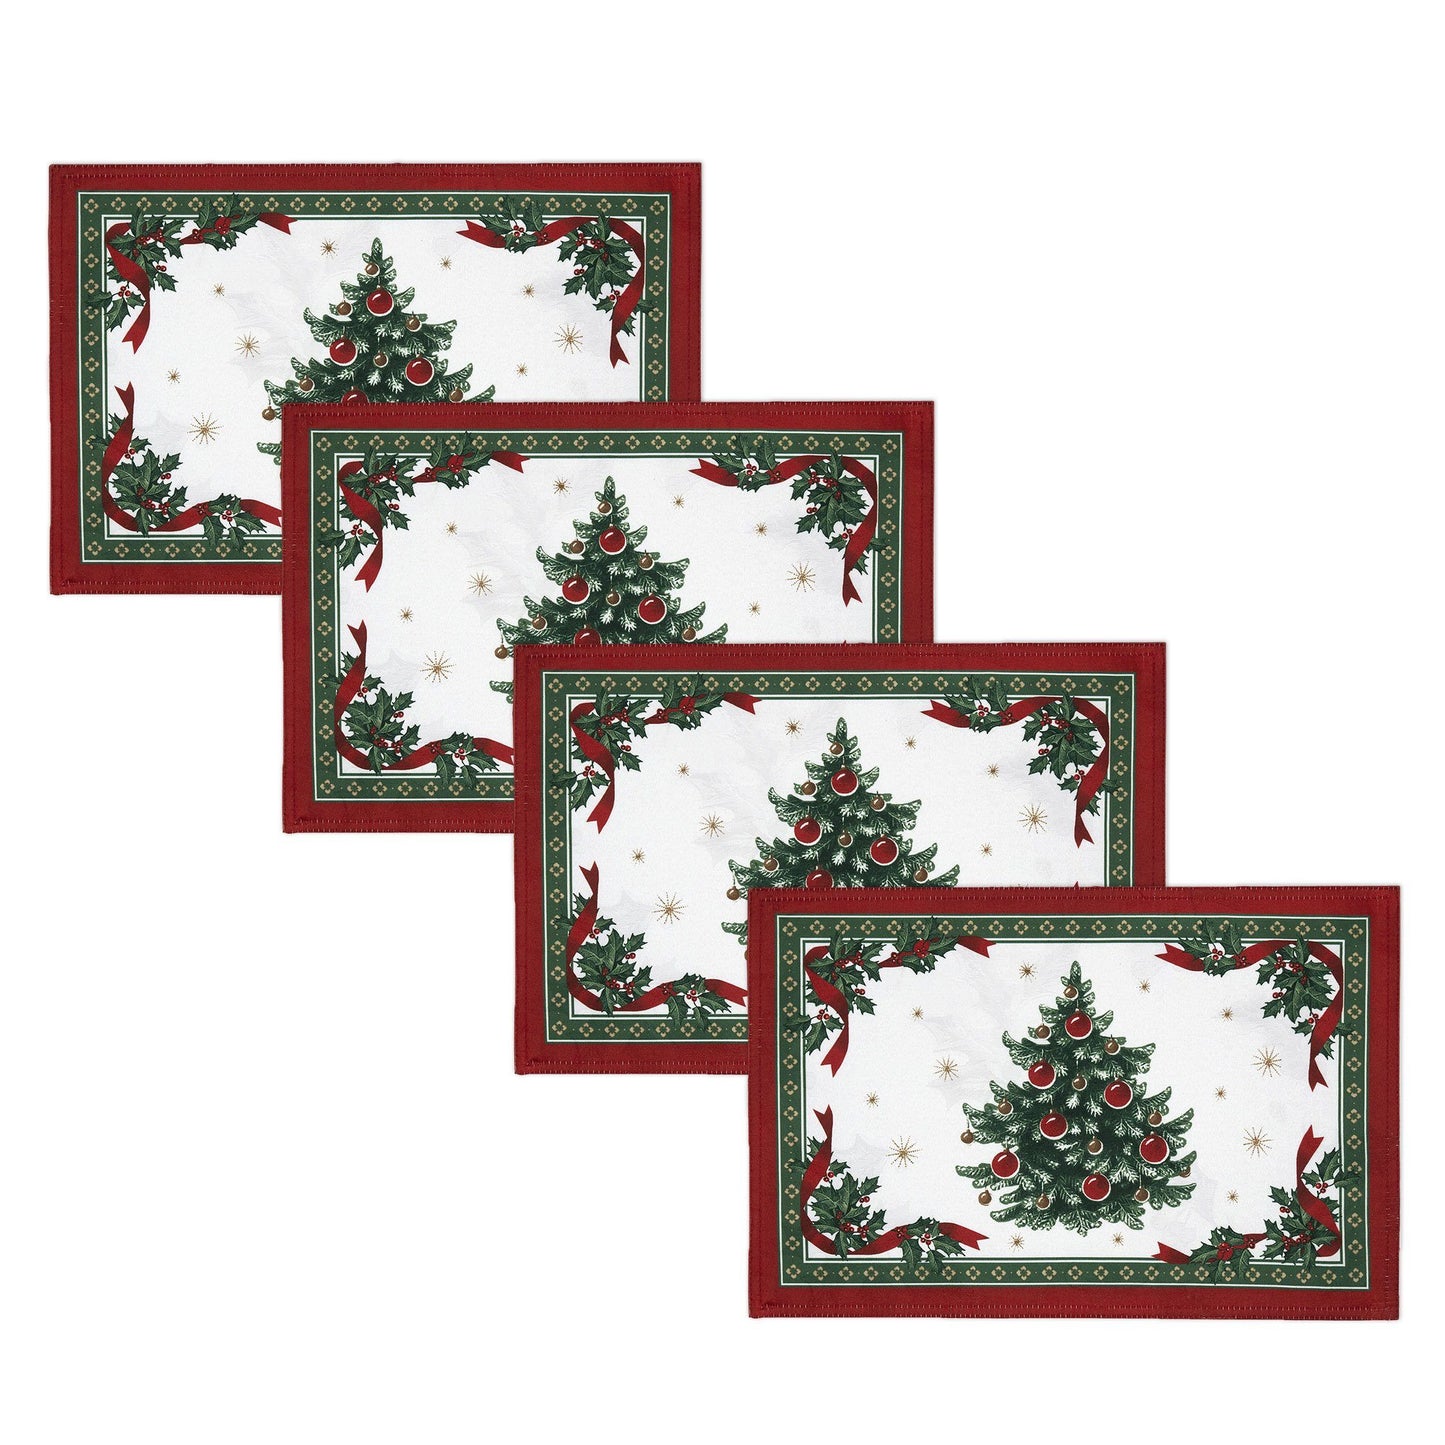 Set of 4 placemats with a white holly damask design on background, a christmas tree in the center and a holly and red ribbon border. The backside is also reversible with a solid red color and holly damask design.